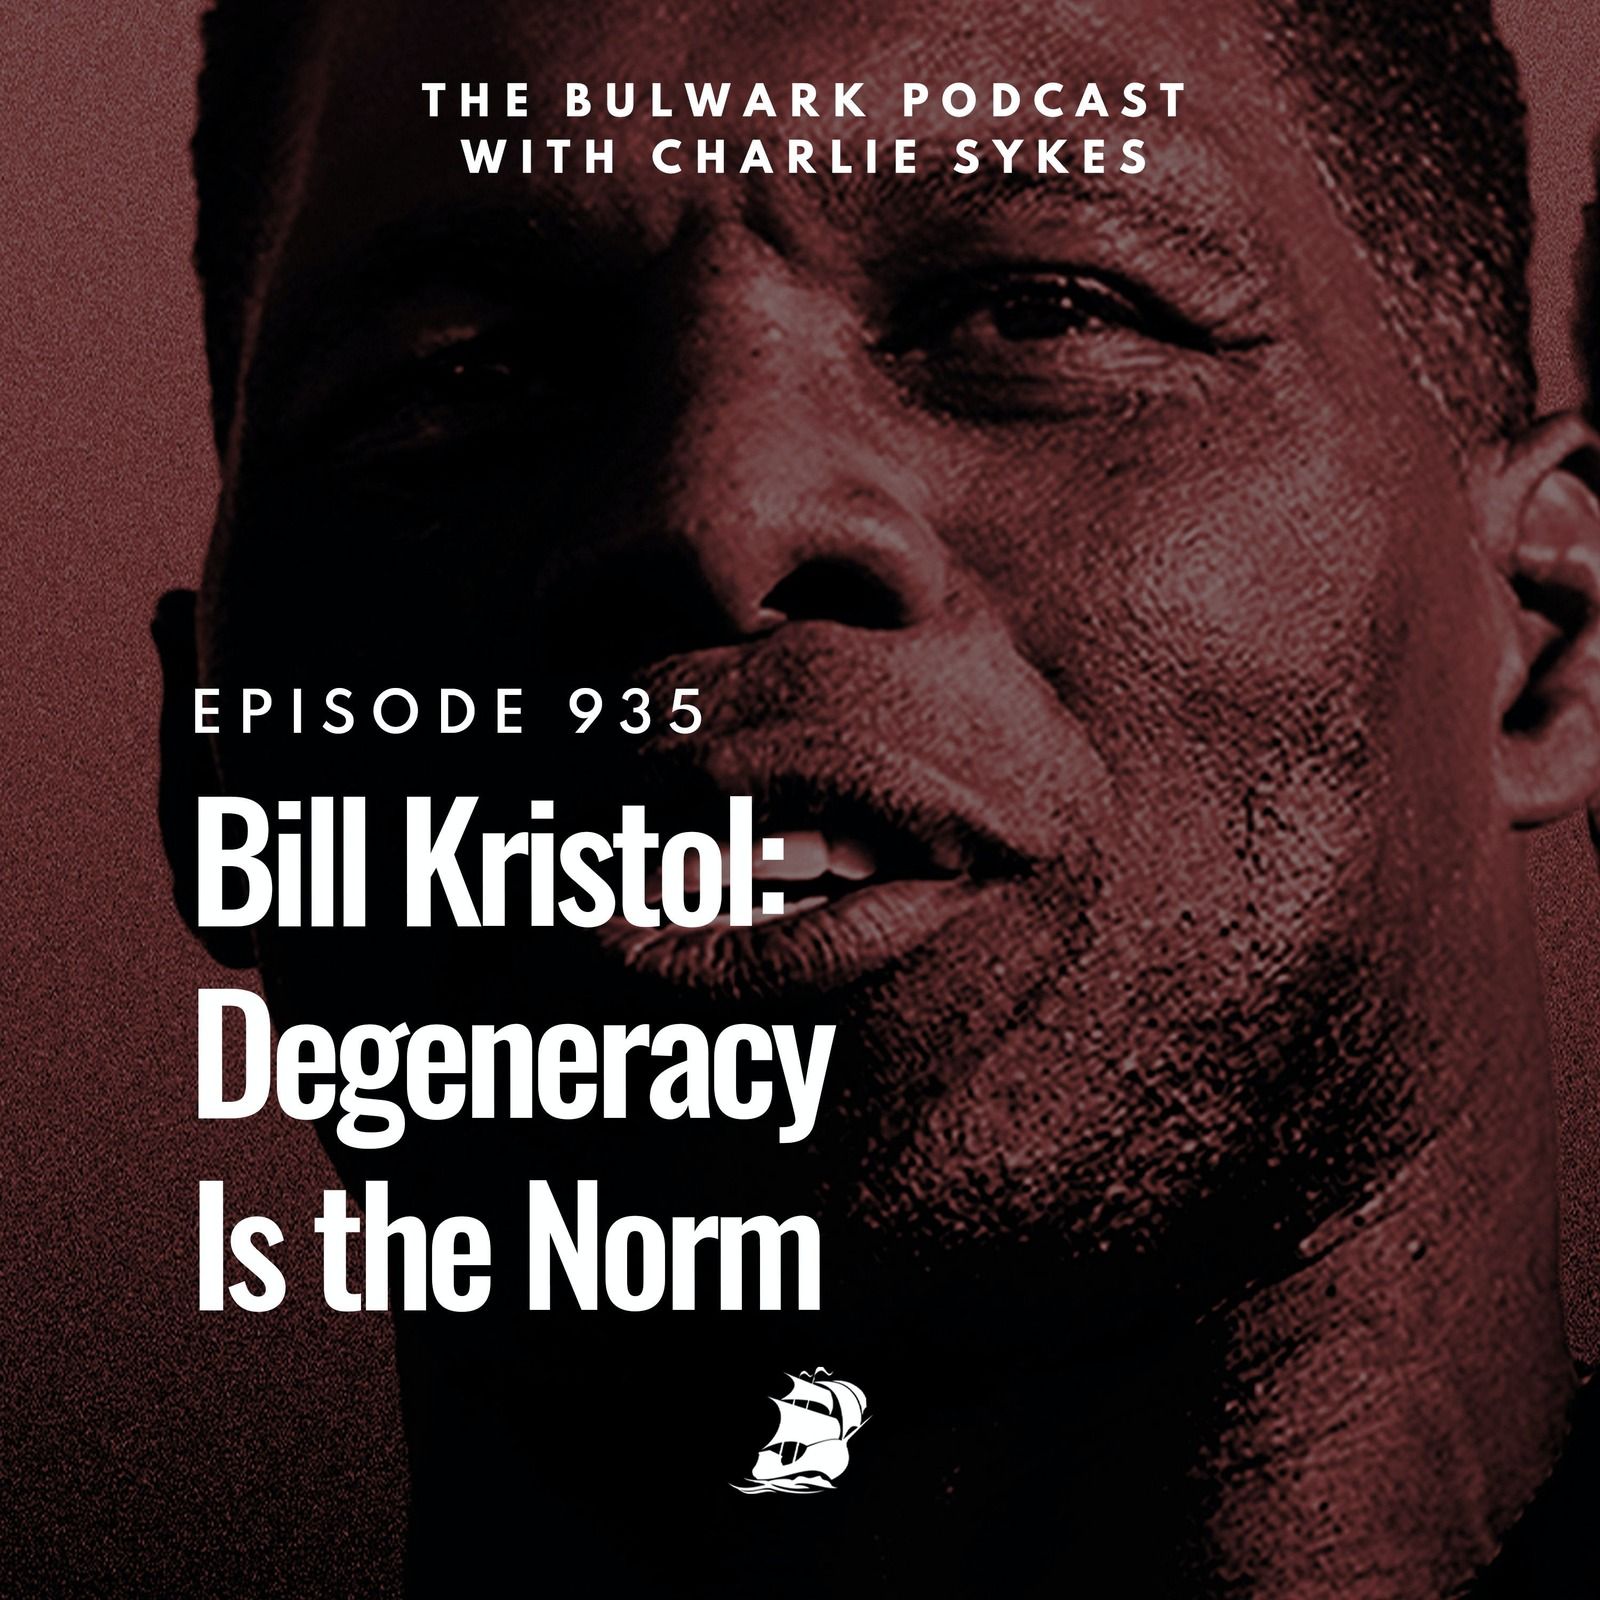 Bill Kristol: Degeneracy Is the Norm by The Bulwark Podcast